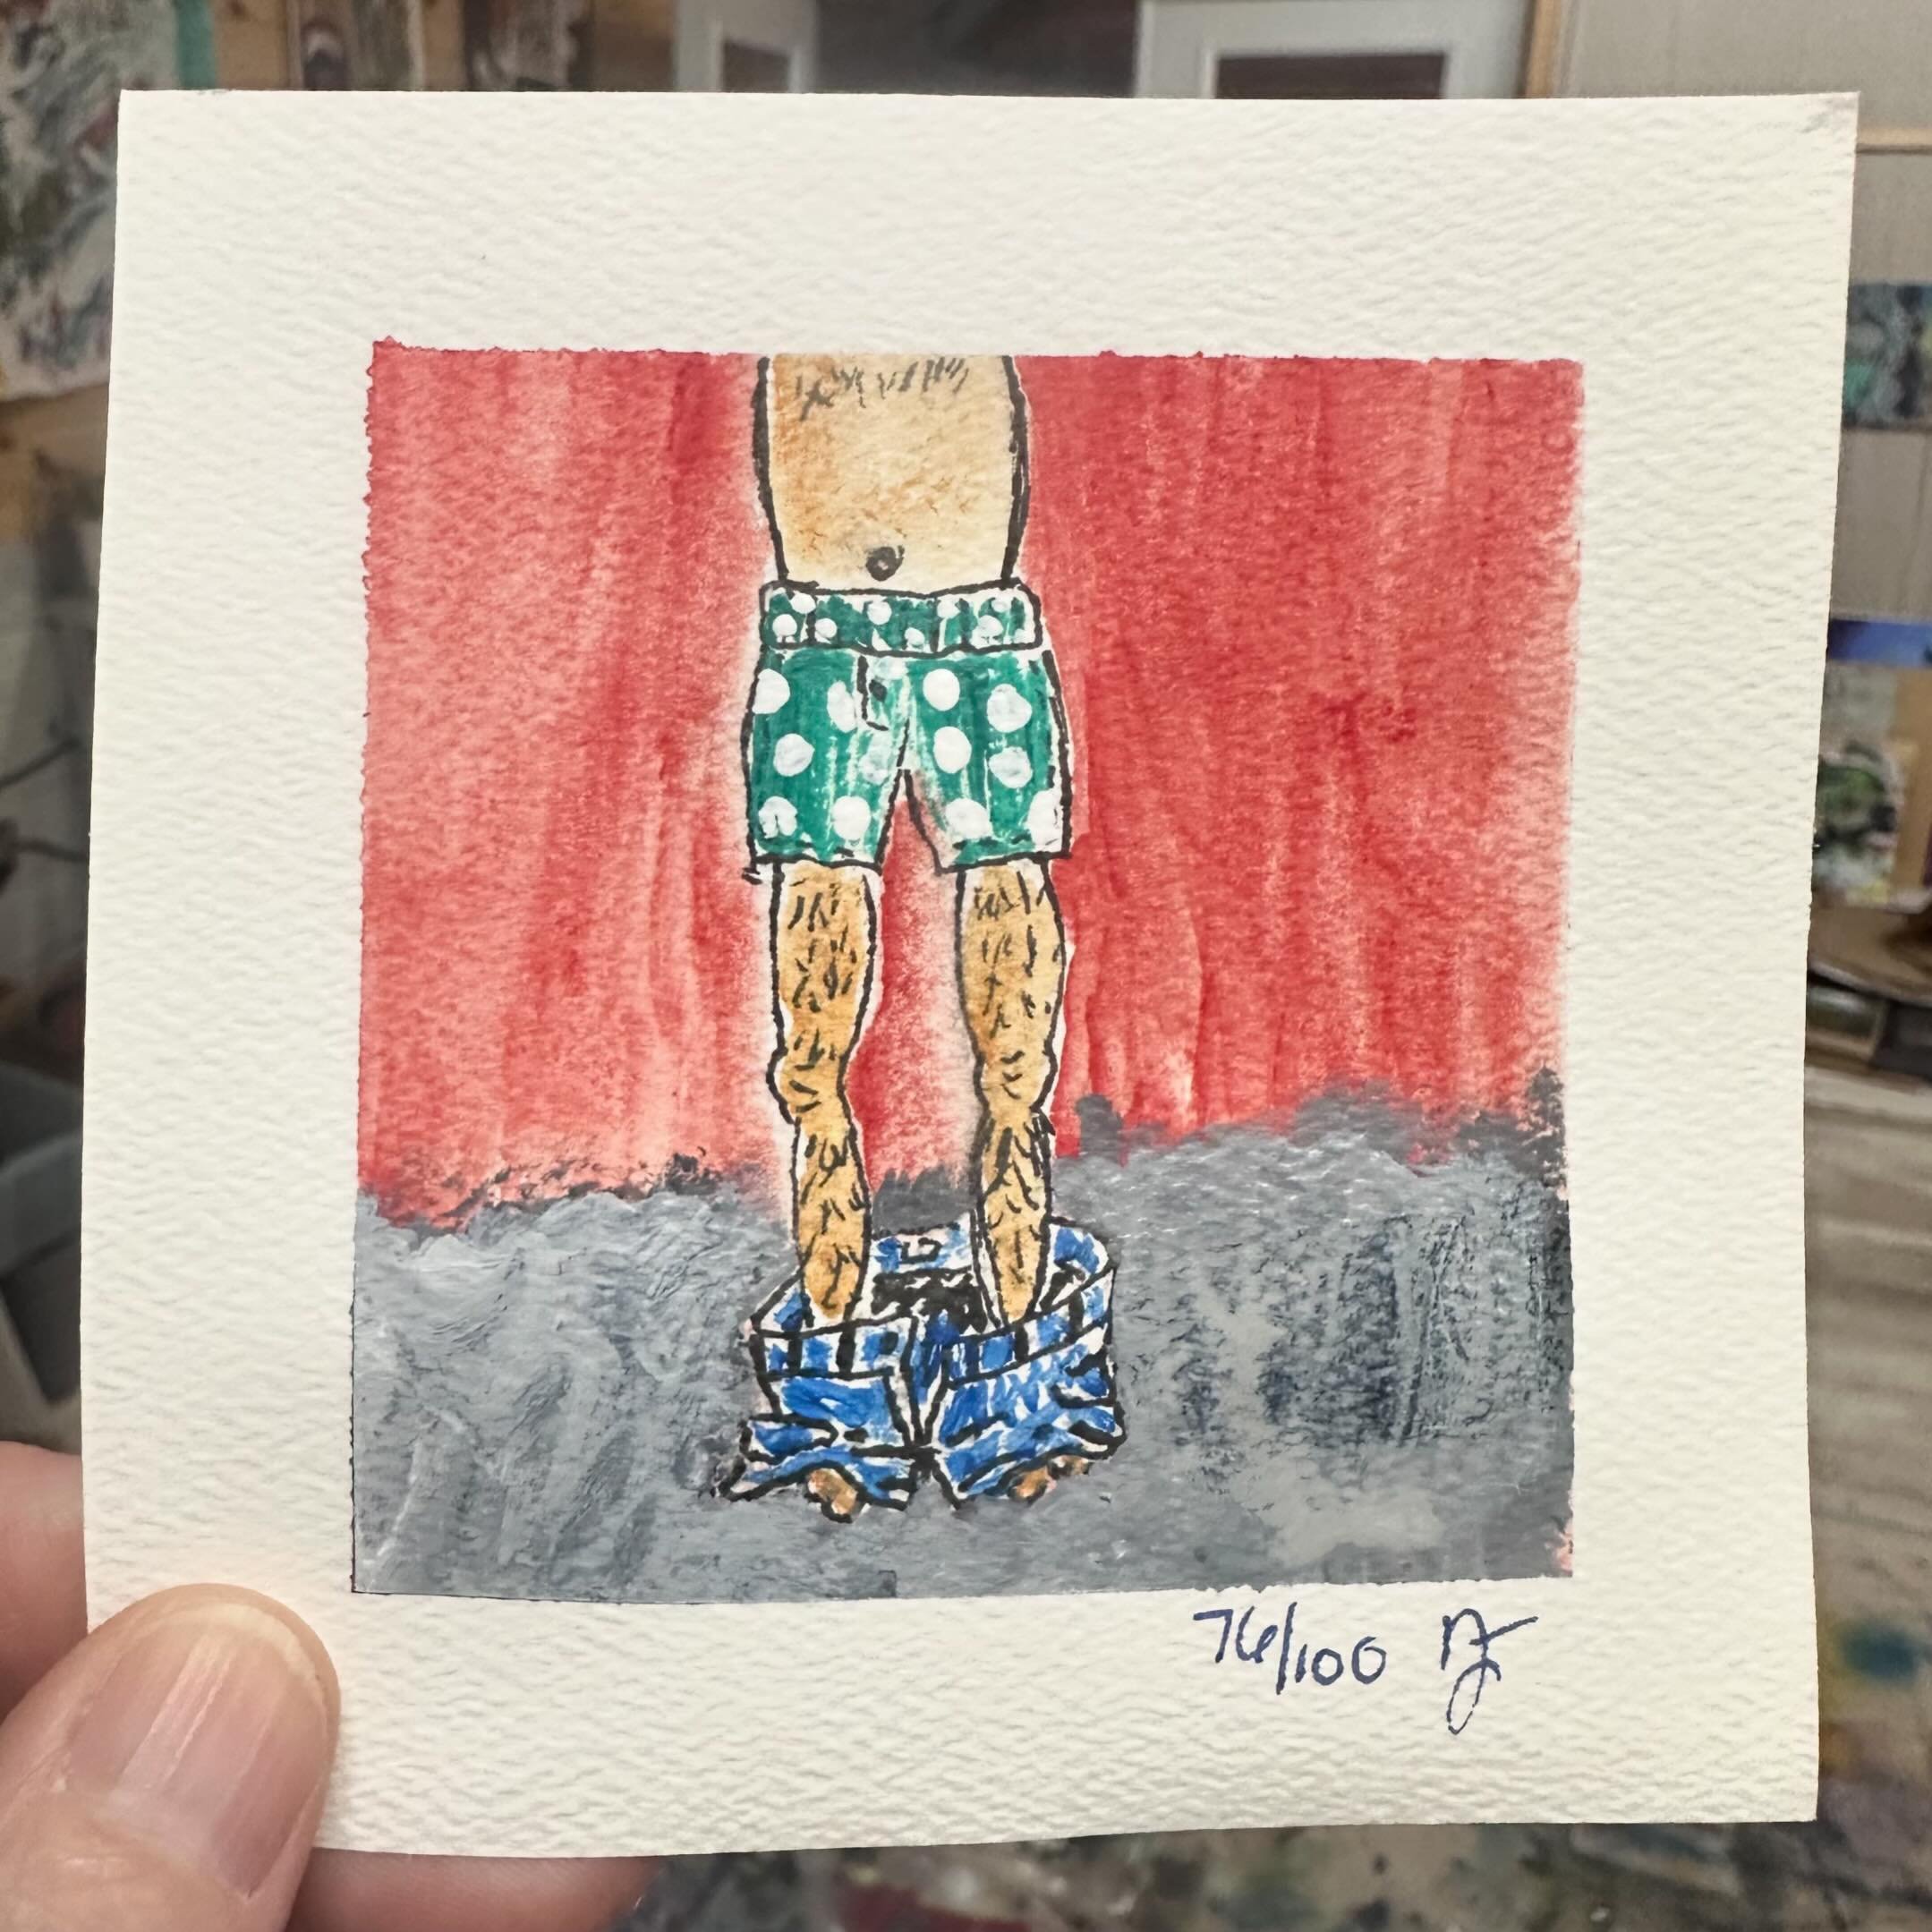 #the100dayproject Day 76! National No Pants Day 😂😁🤣 oh this one was just funny! 
.
.
#nationalnopantsday #nikkijorgensen #artist #art #artwork #miniart #createeveryday #create #paint #funny